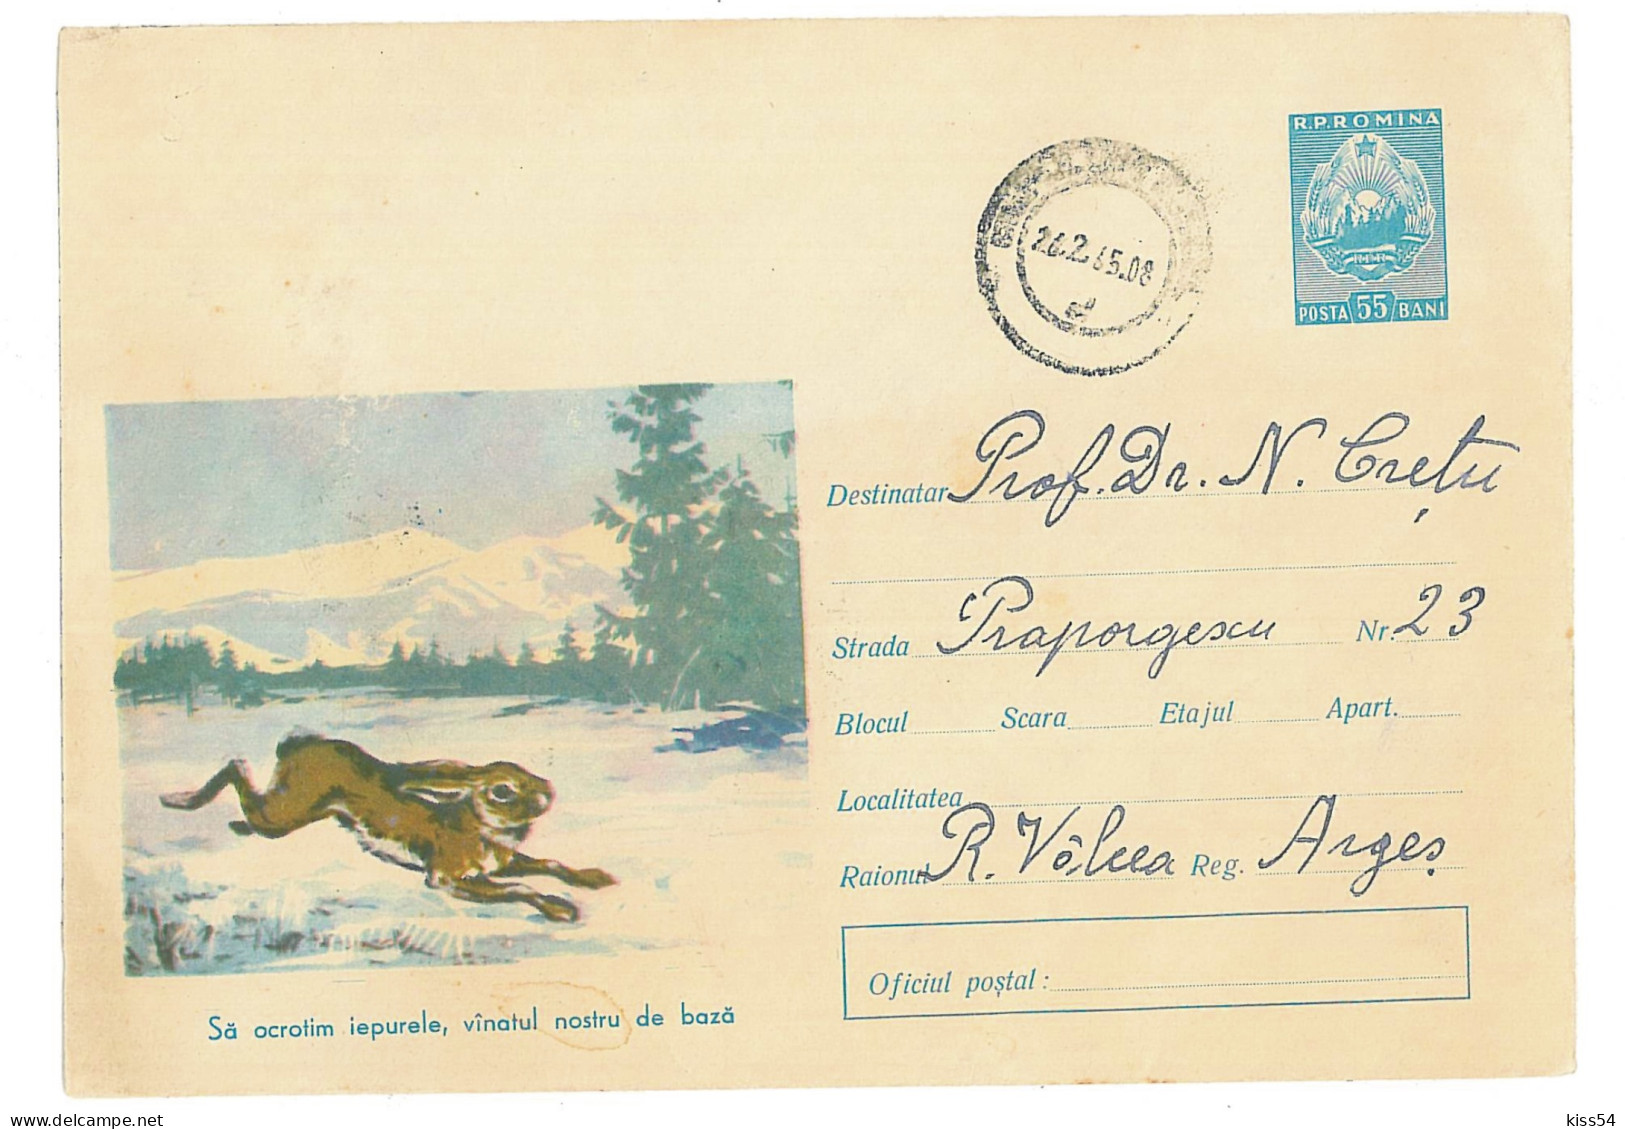 IP 64 A - 046a RABBIT, Winter, Romania - Stationery - Used - 1964 - Hasen